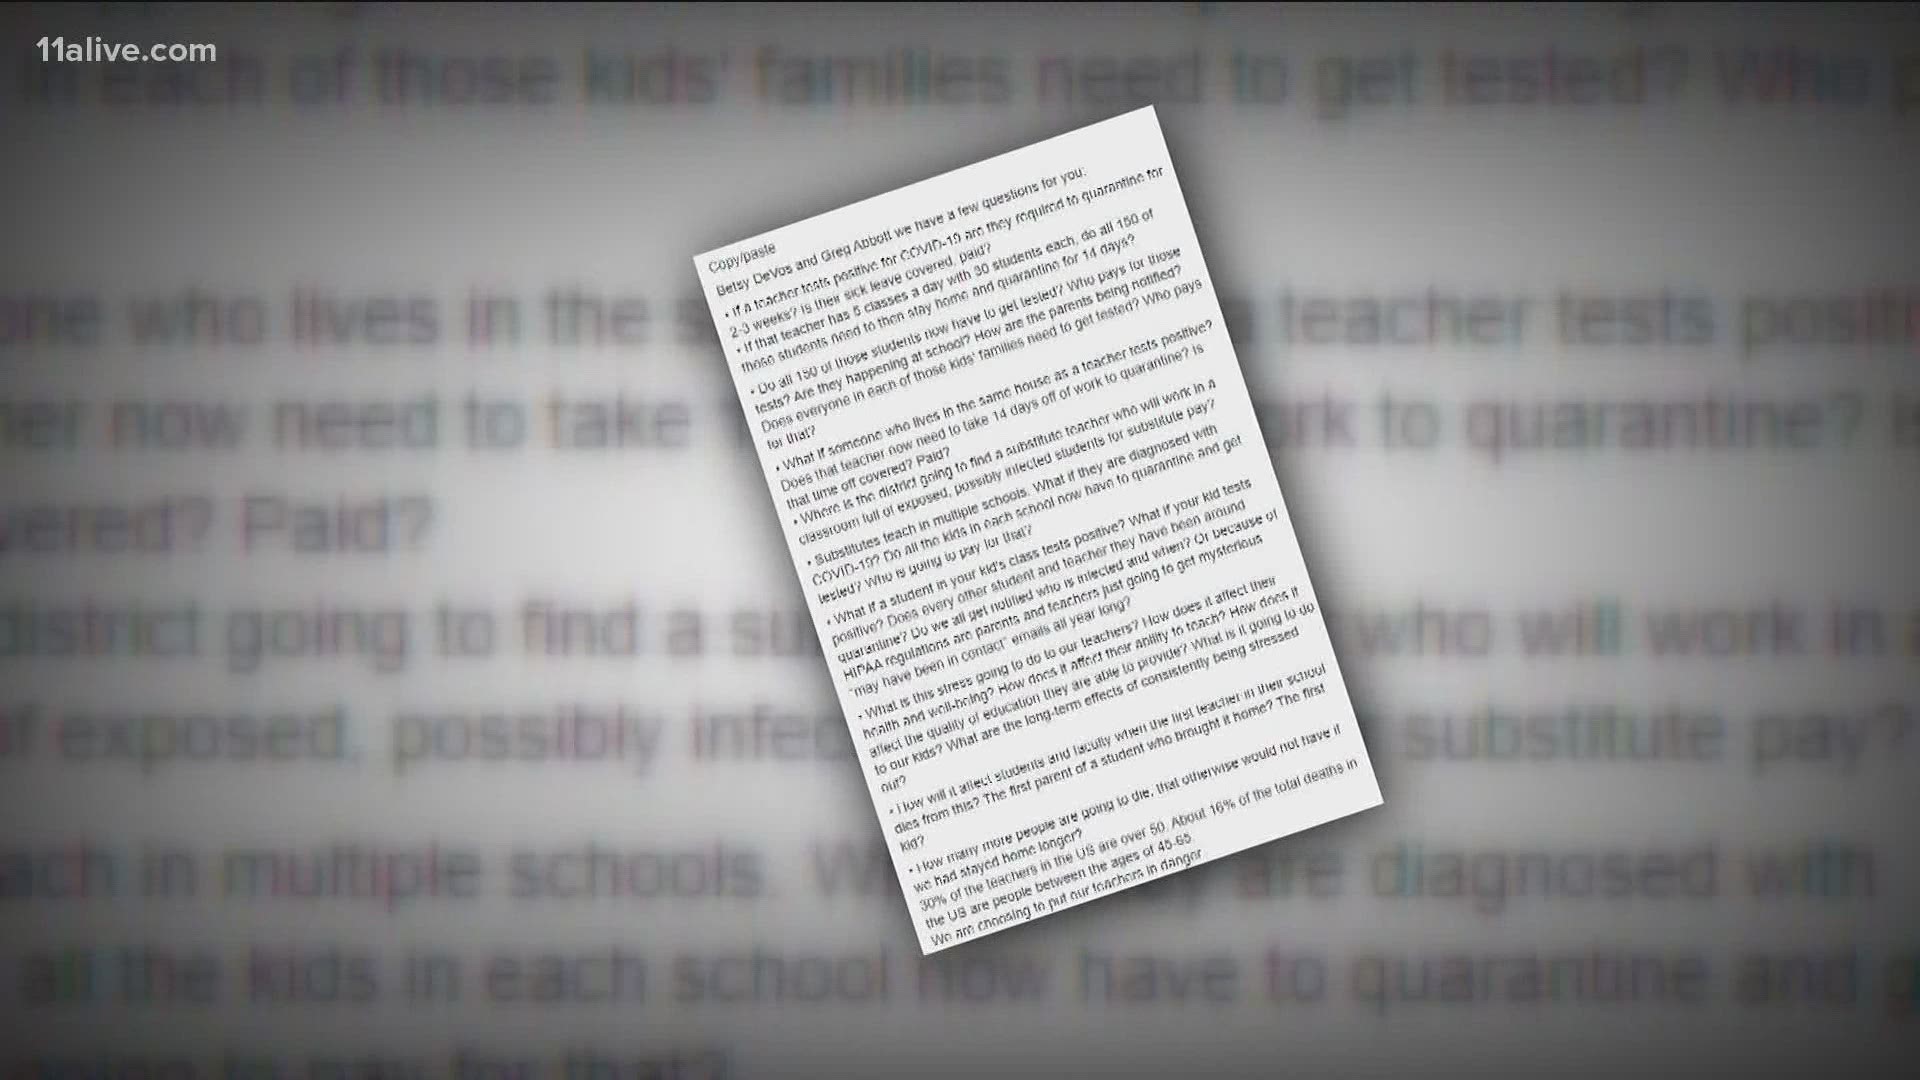 11Alive is digging into some of the concerns of educators, parents, and students.